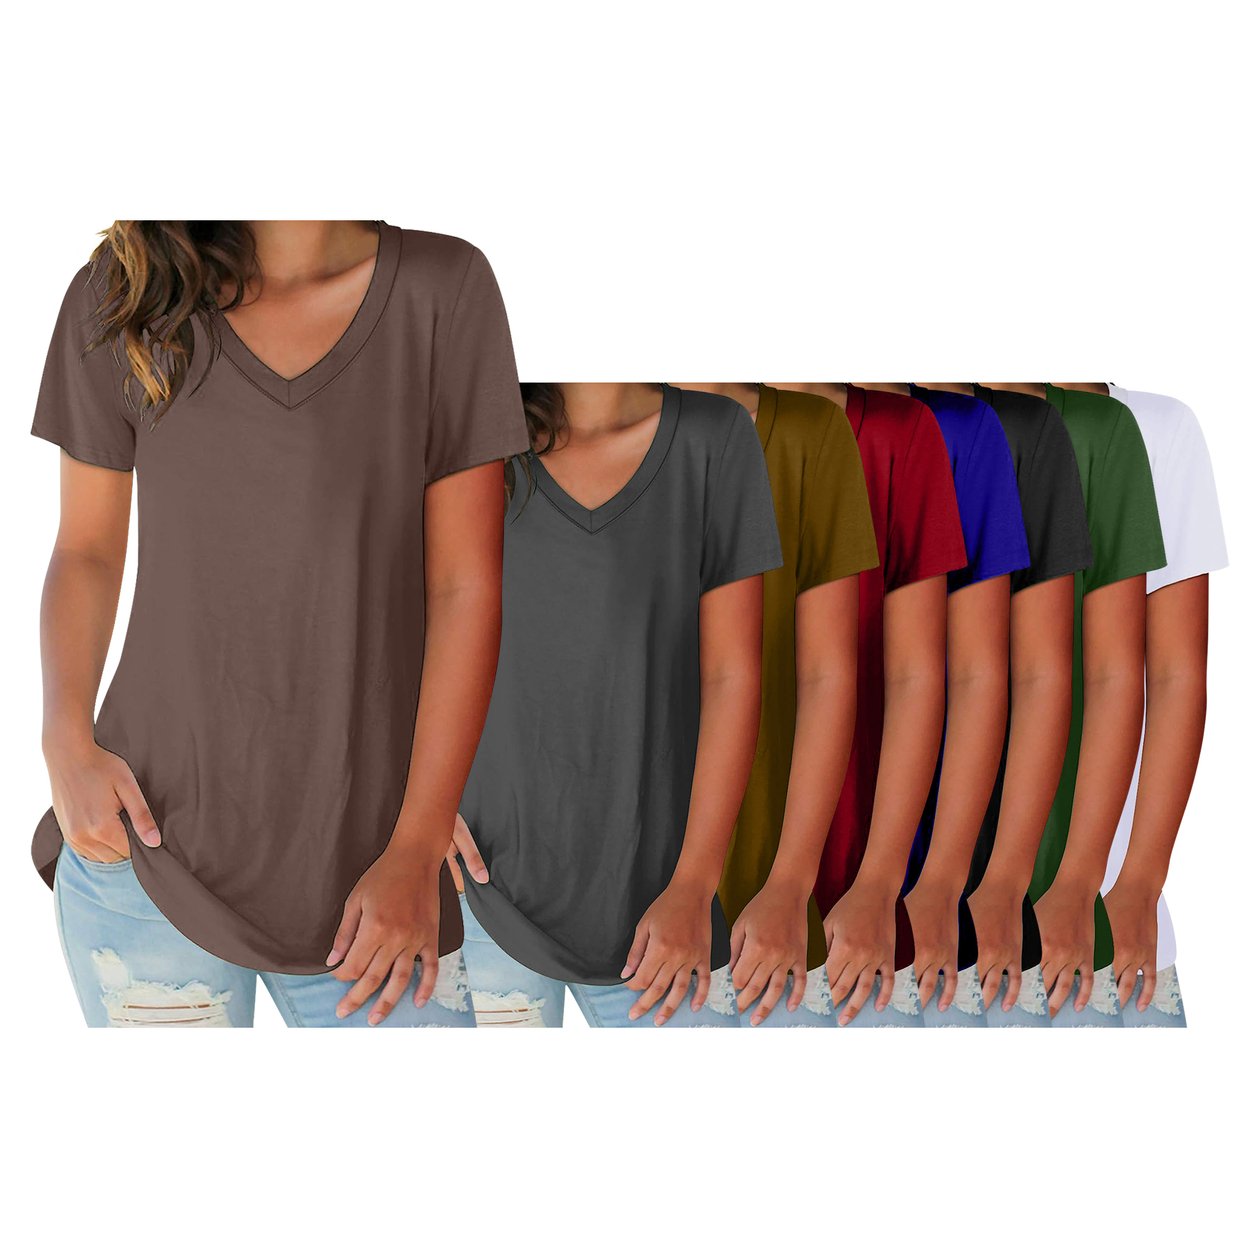 3-Pack: Women's Ultra Soft Smooth Cotton Blend Basic V-Neck Short Sleeve Shirts - Black Grey, Red, Small